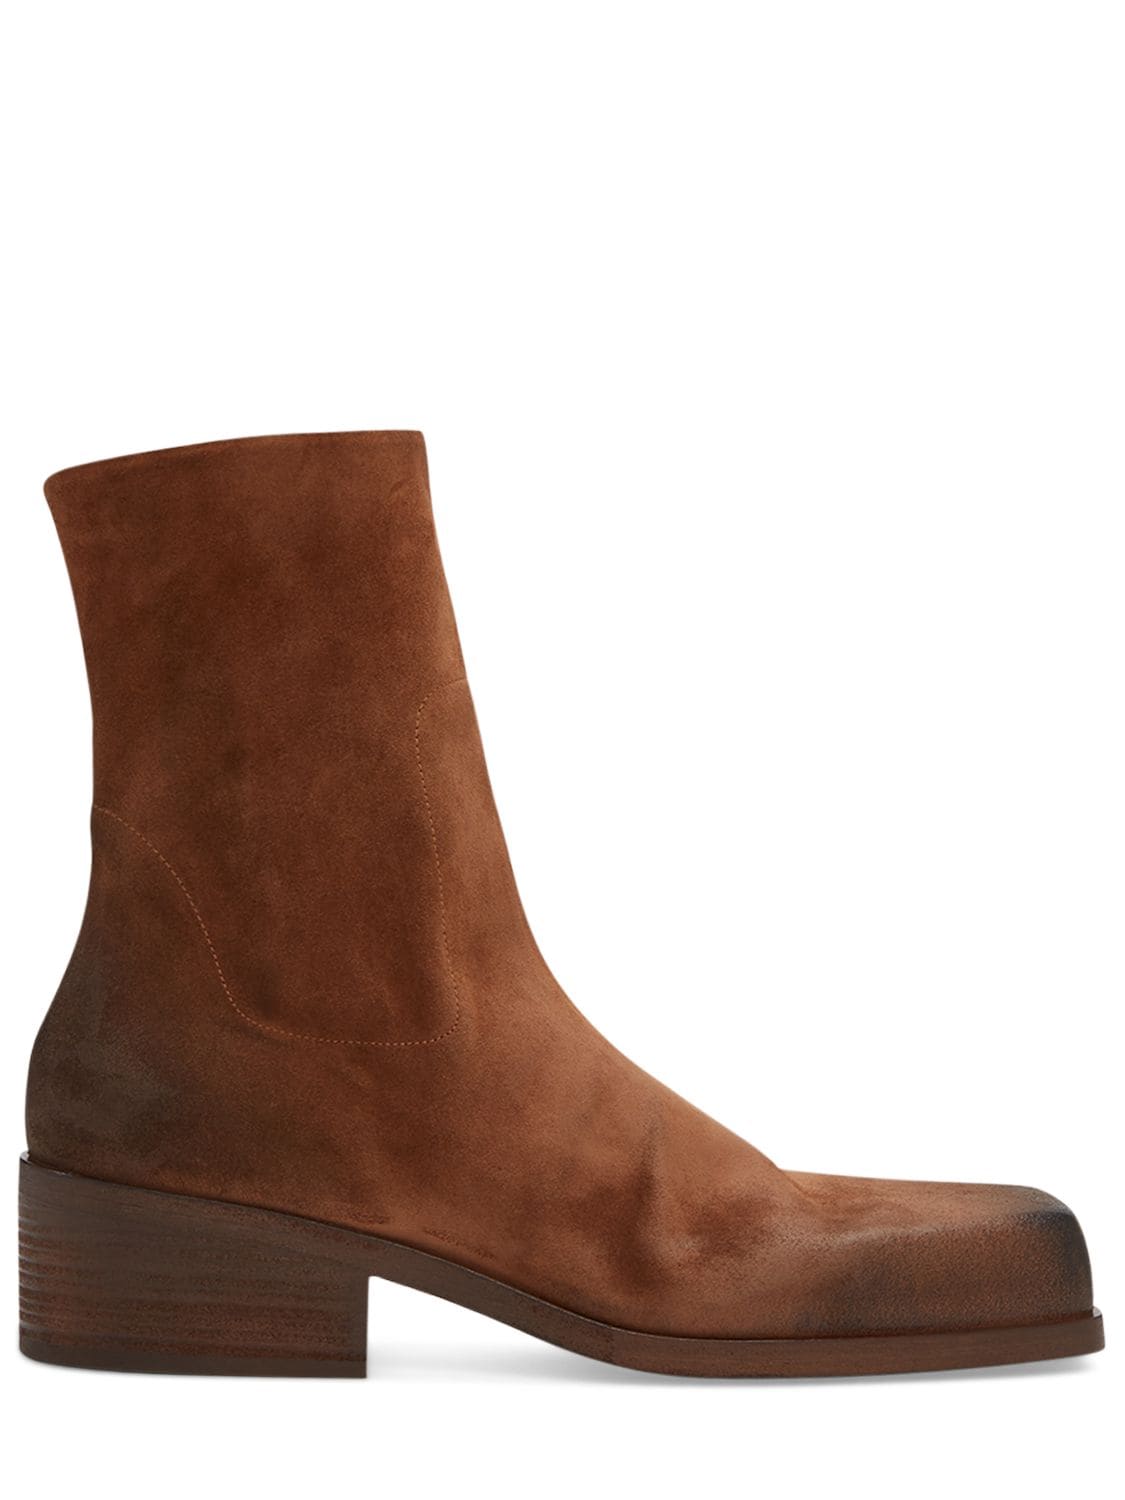 Image of Cassello Suede Boots